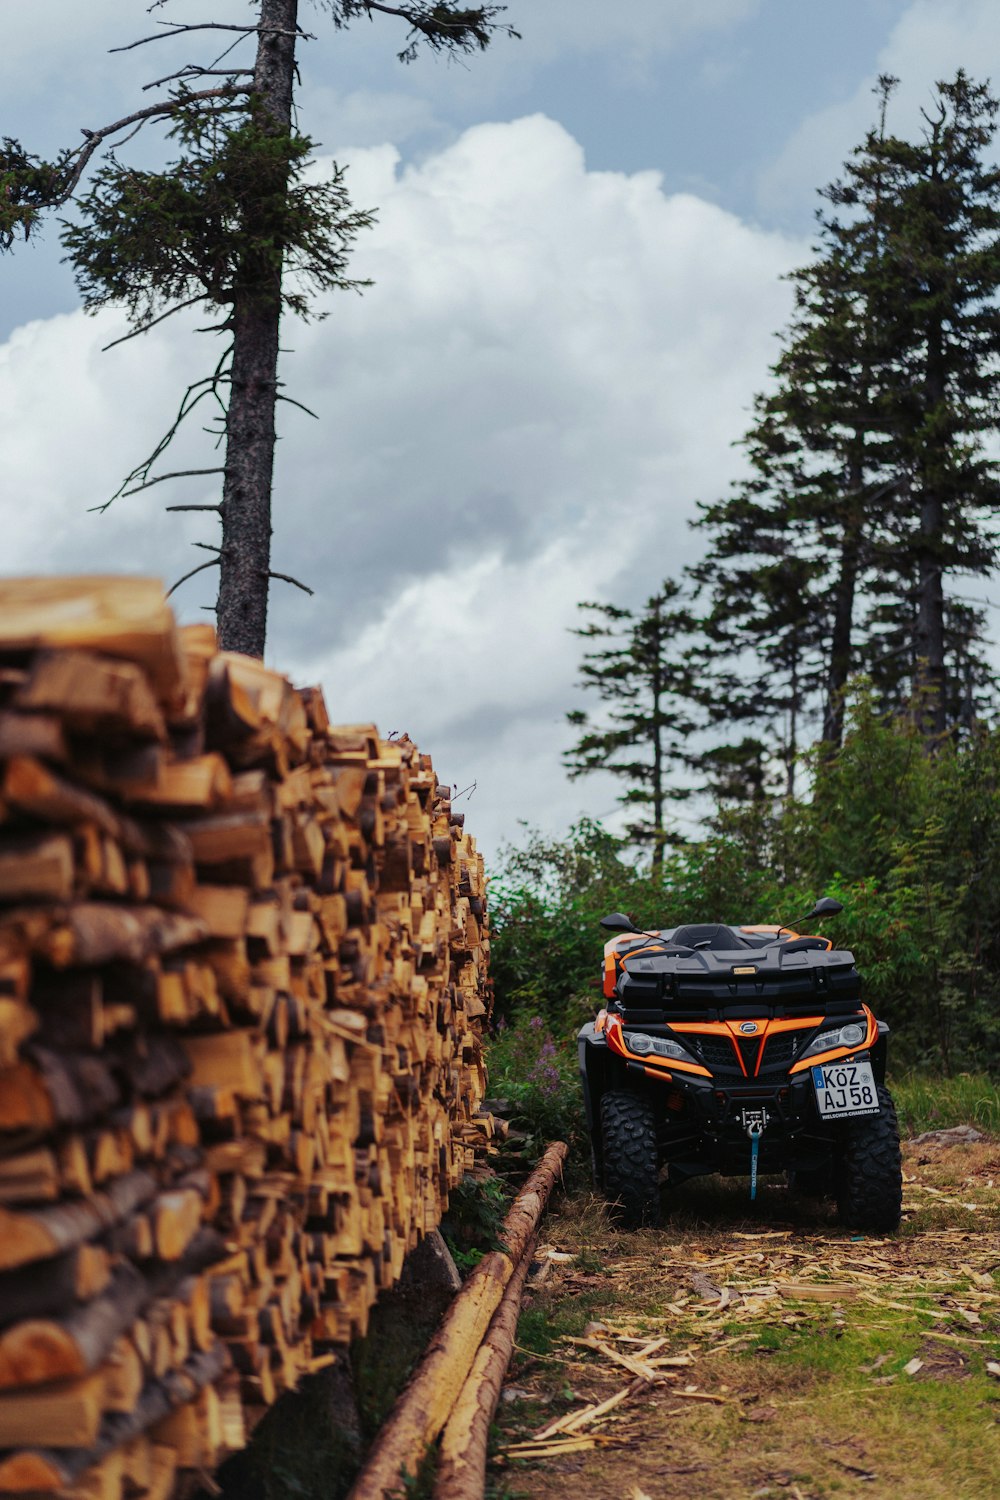 a four - wheeler is parked next to a pile of logs